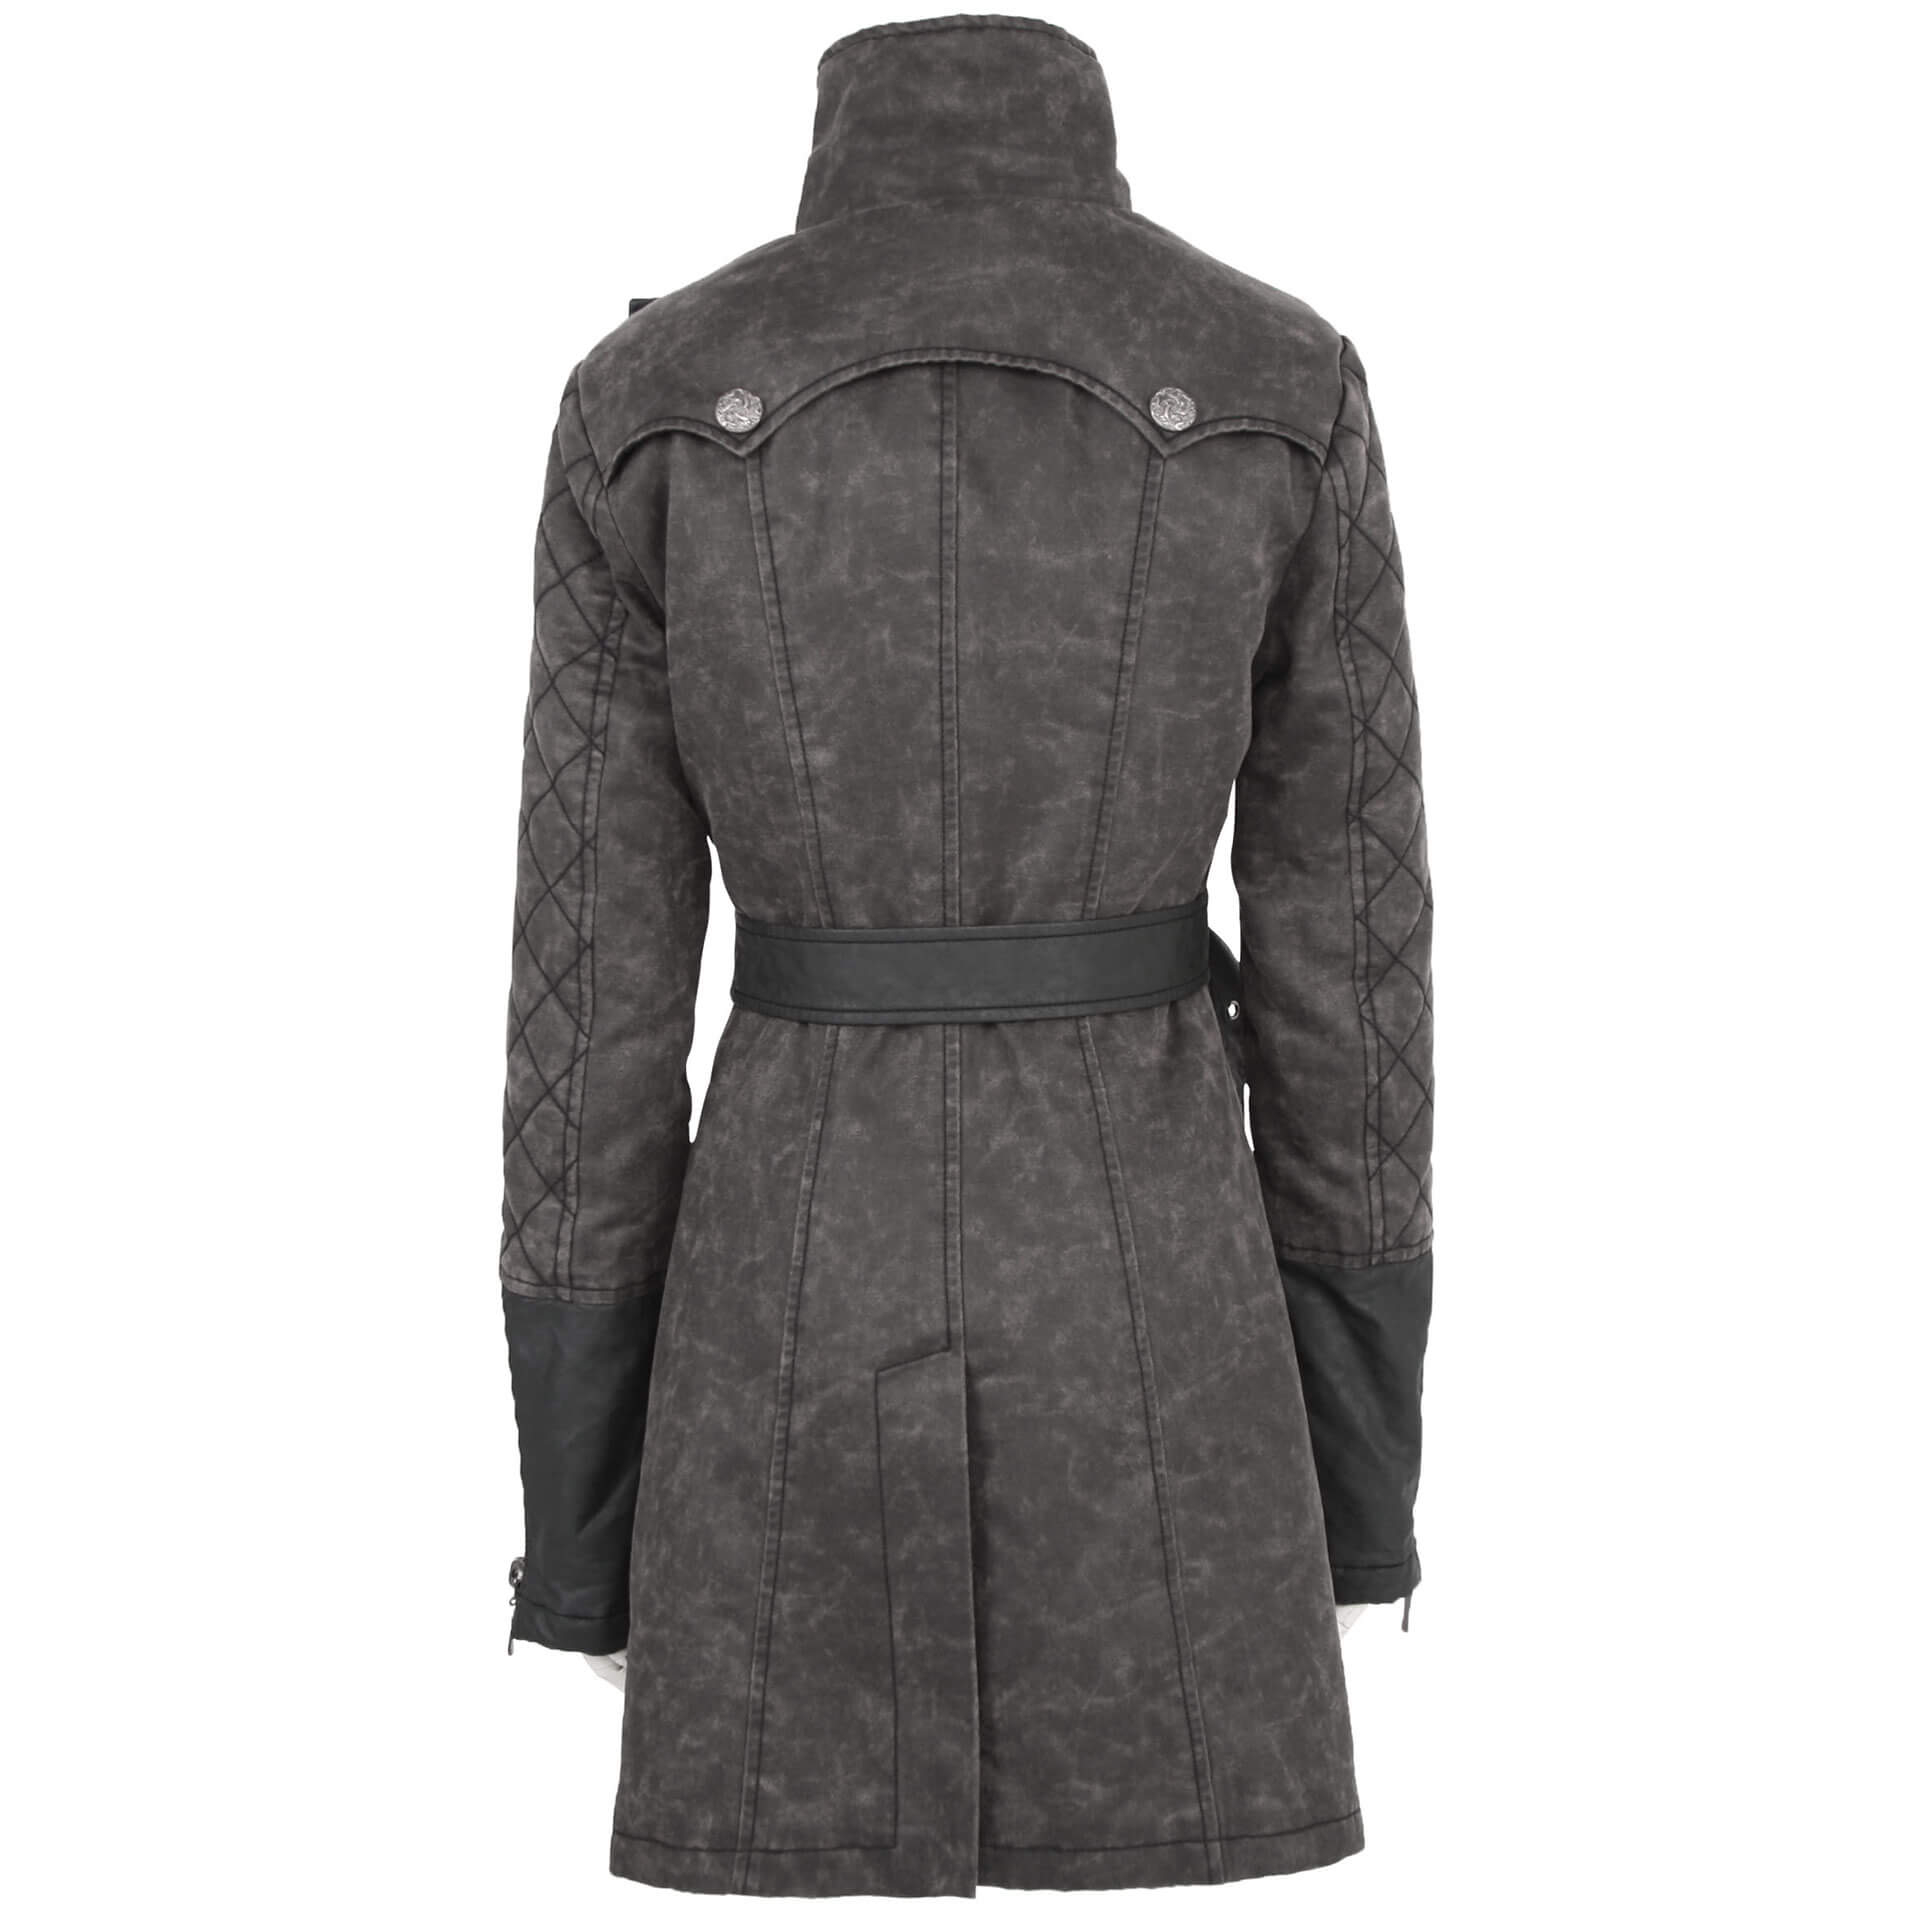 coupon vereist halsband The Nomad Coat by Punk Rave brand